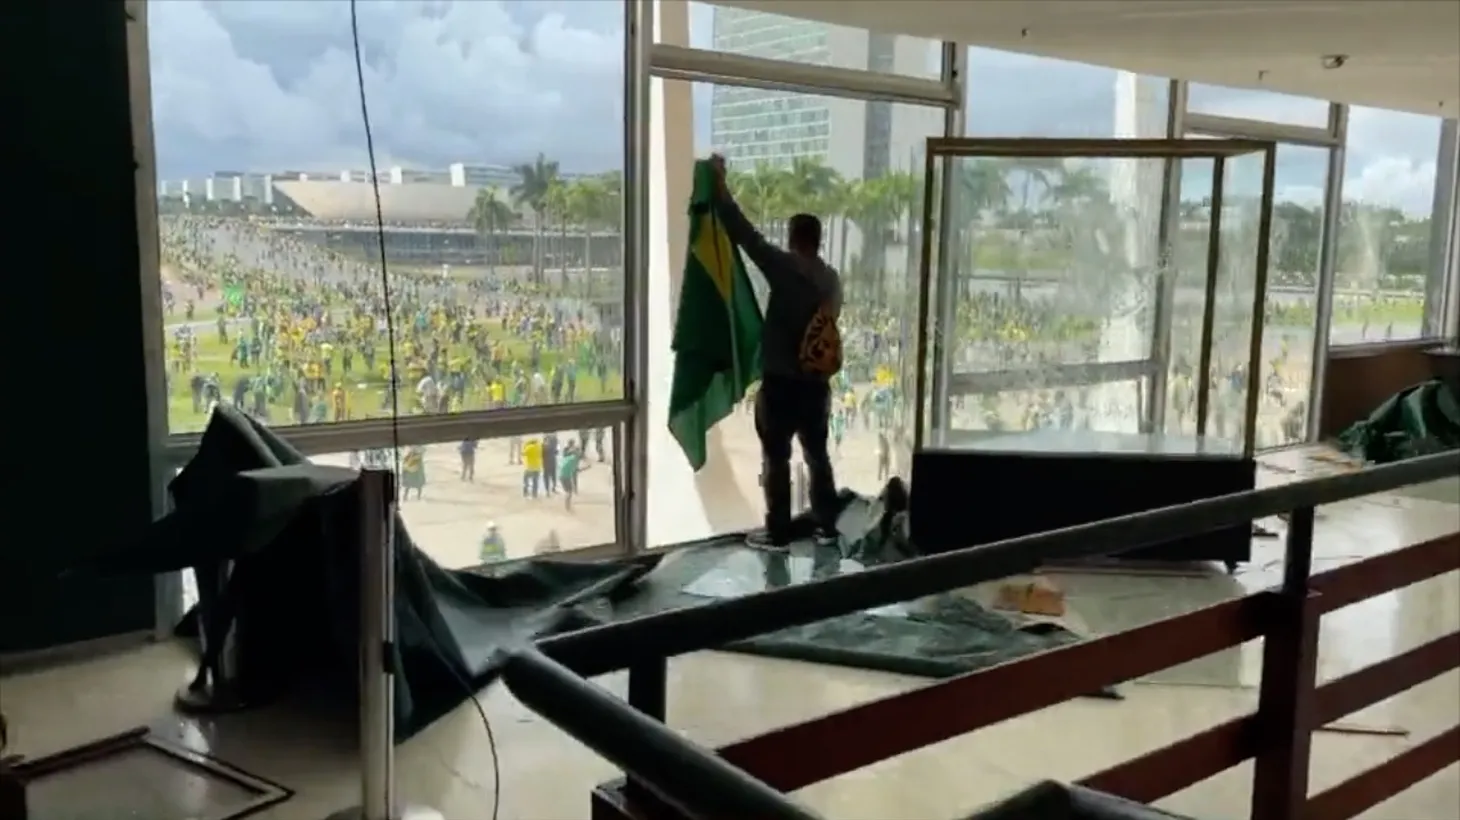 Supporters of Brazil's former president Jair Bolsonaro storm the National Congress and Supreme Court in the capital Brasília on Sunday Jan 8, 2023.